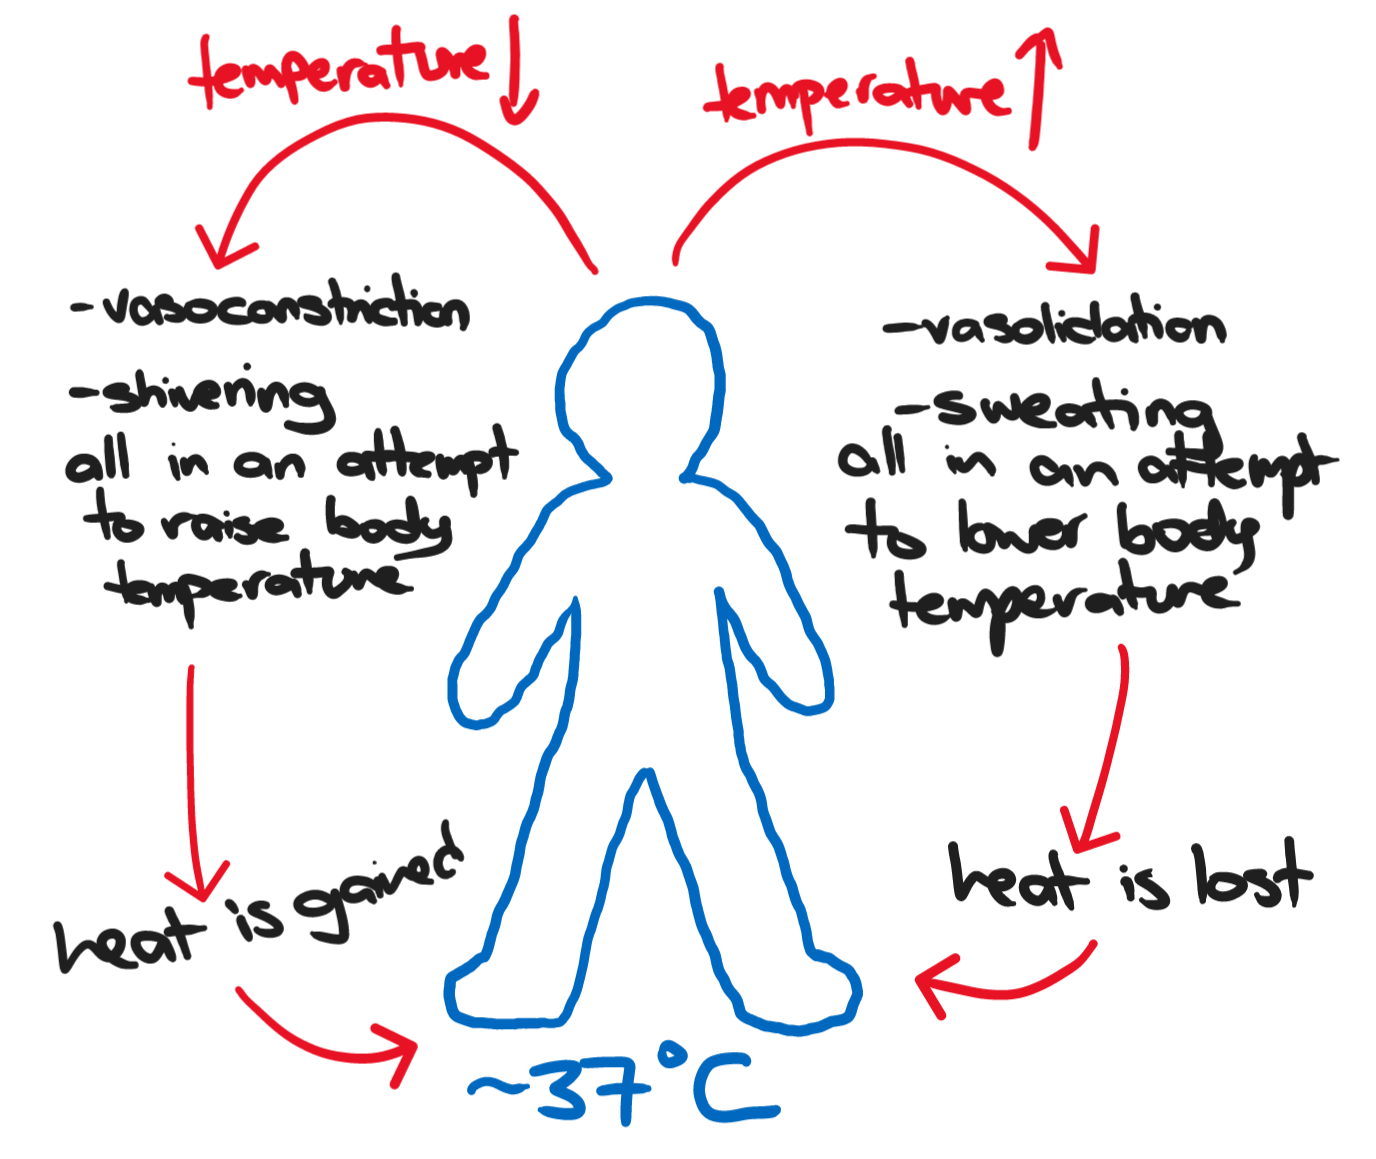 The negative feedback loop for human body temperature